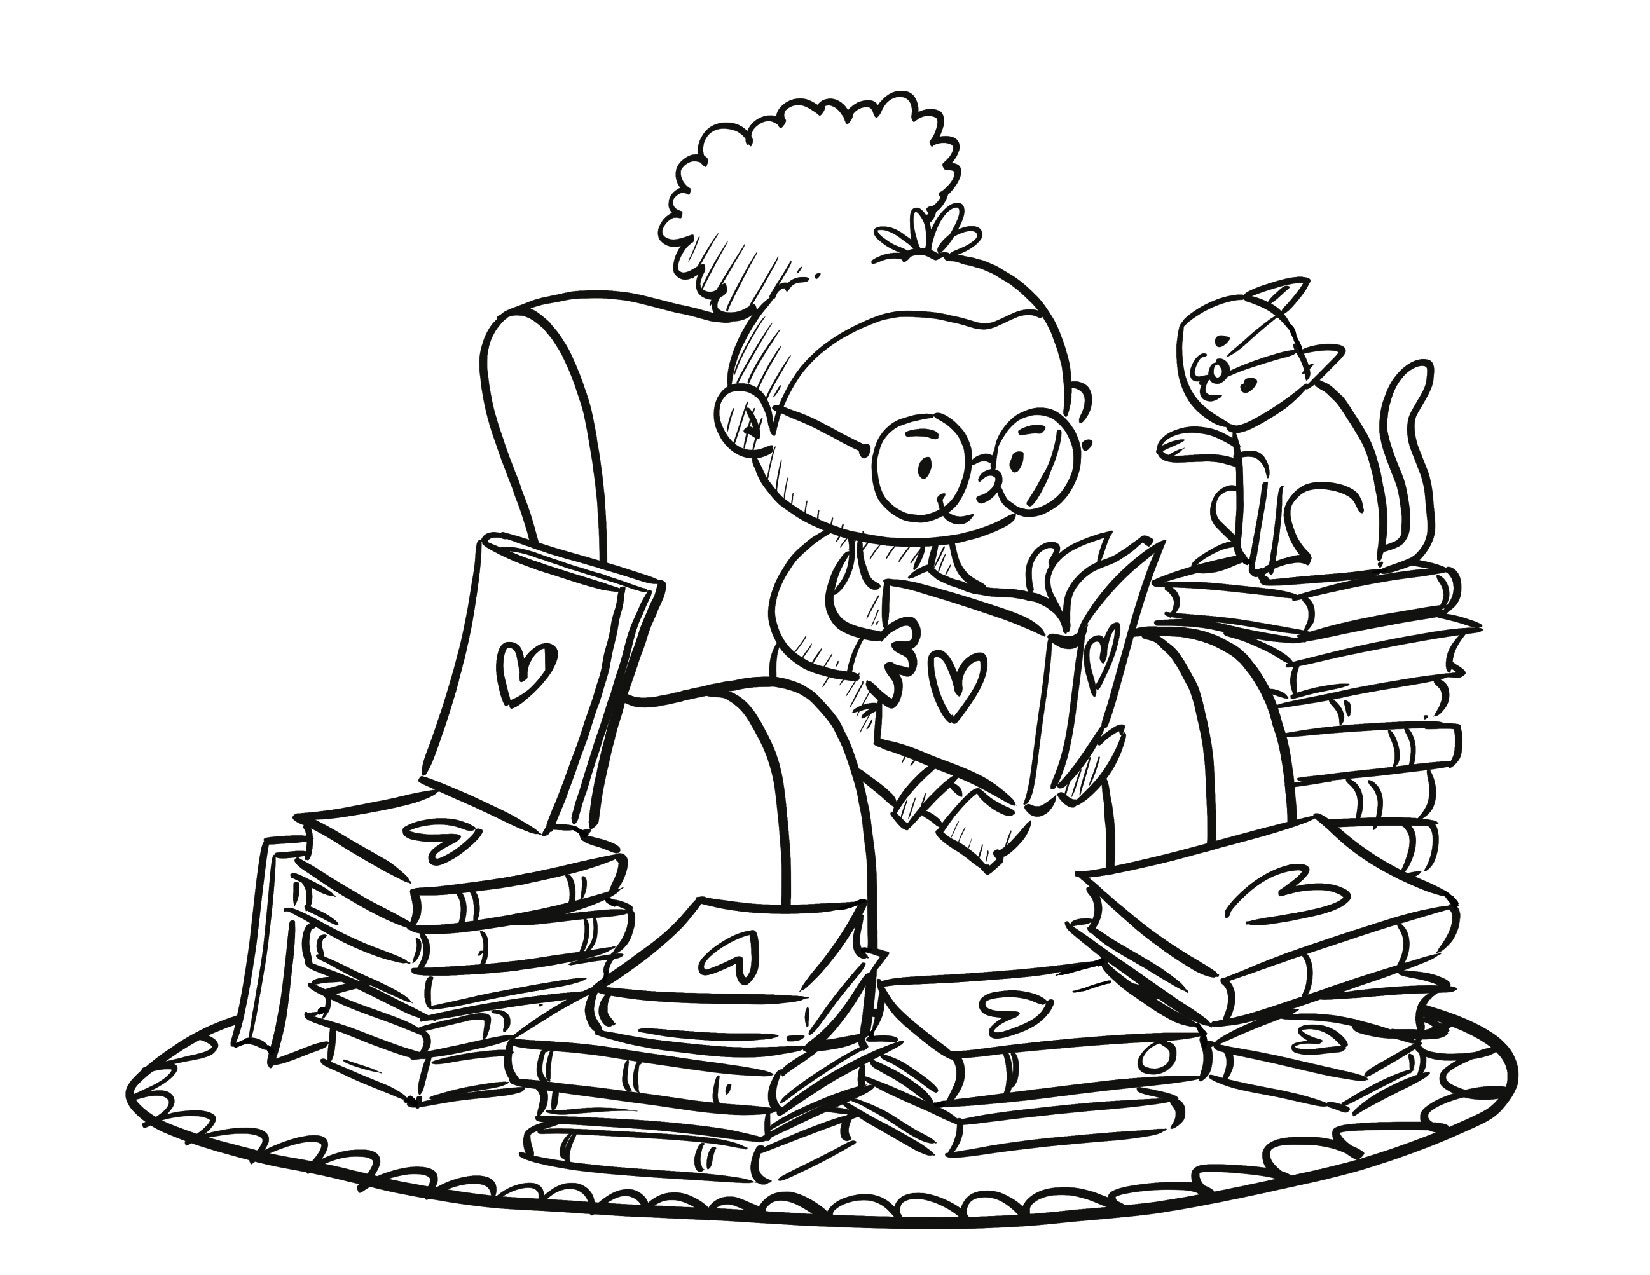 Coloring page of a little girl sitting in an easy chair with a cat on the arm, reading a pile of books with hearts on the cover of every one